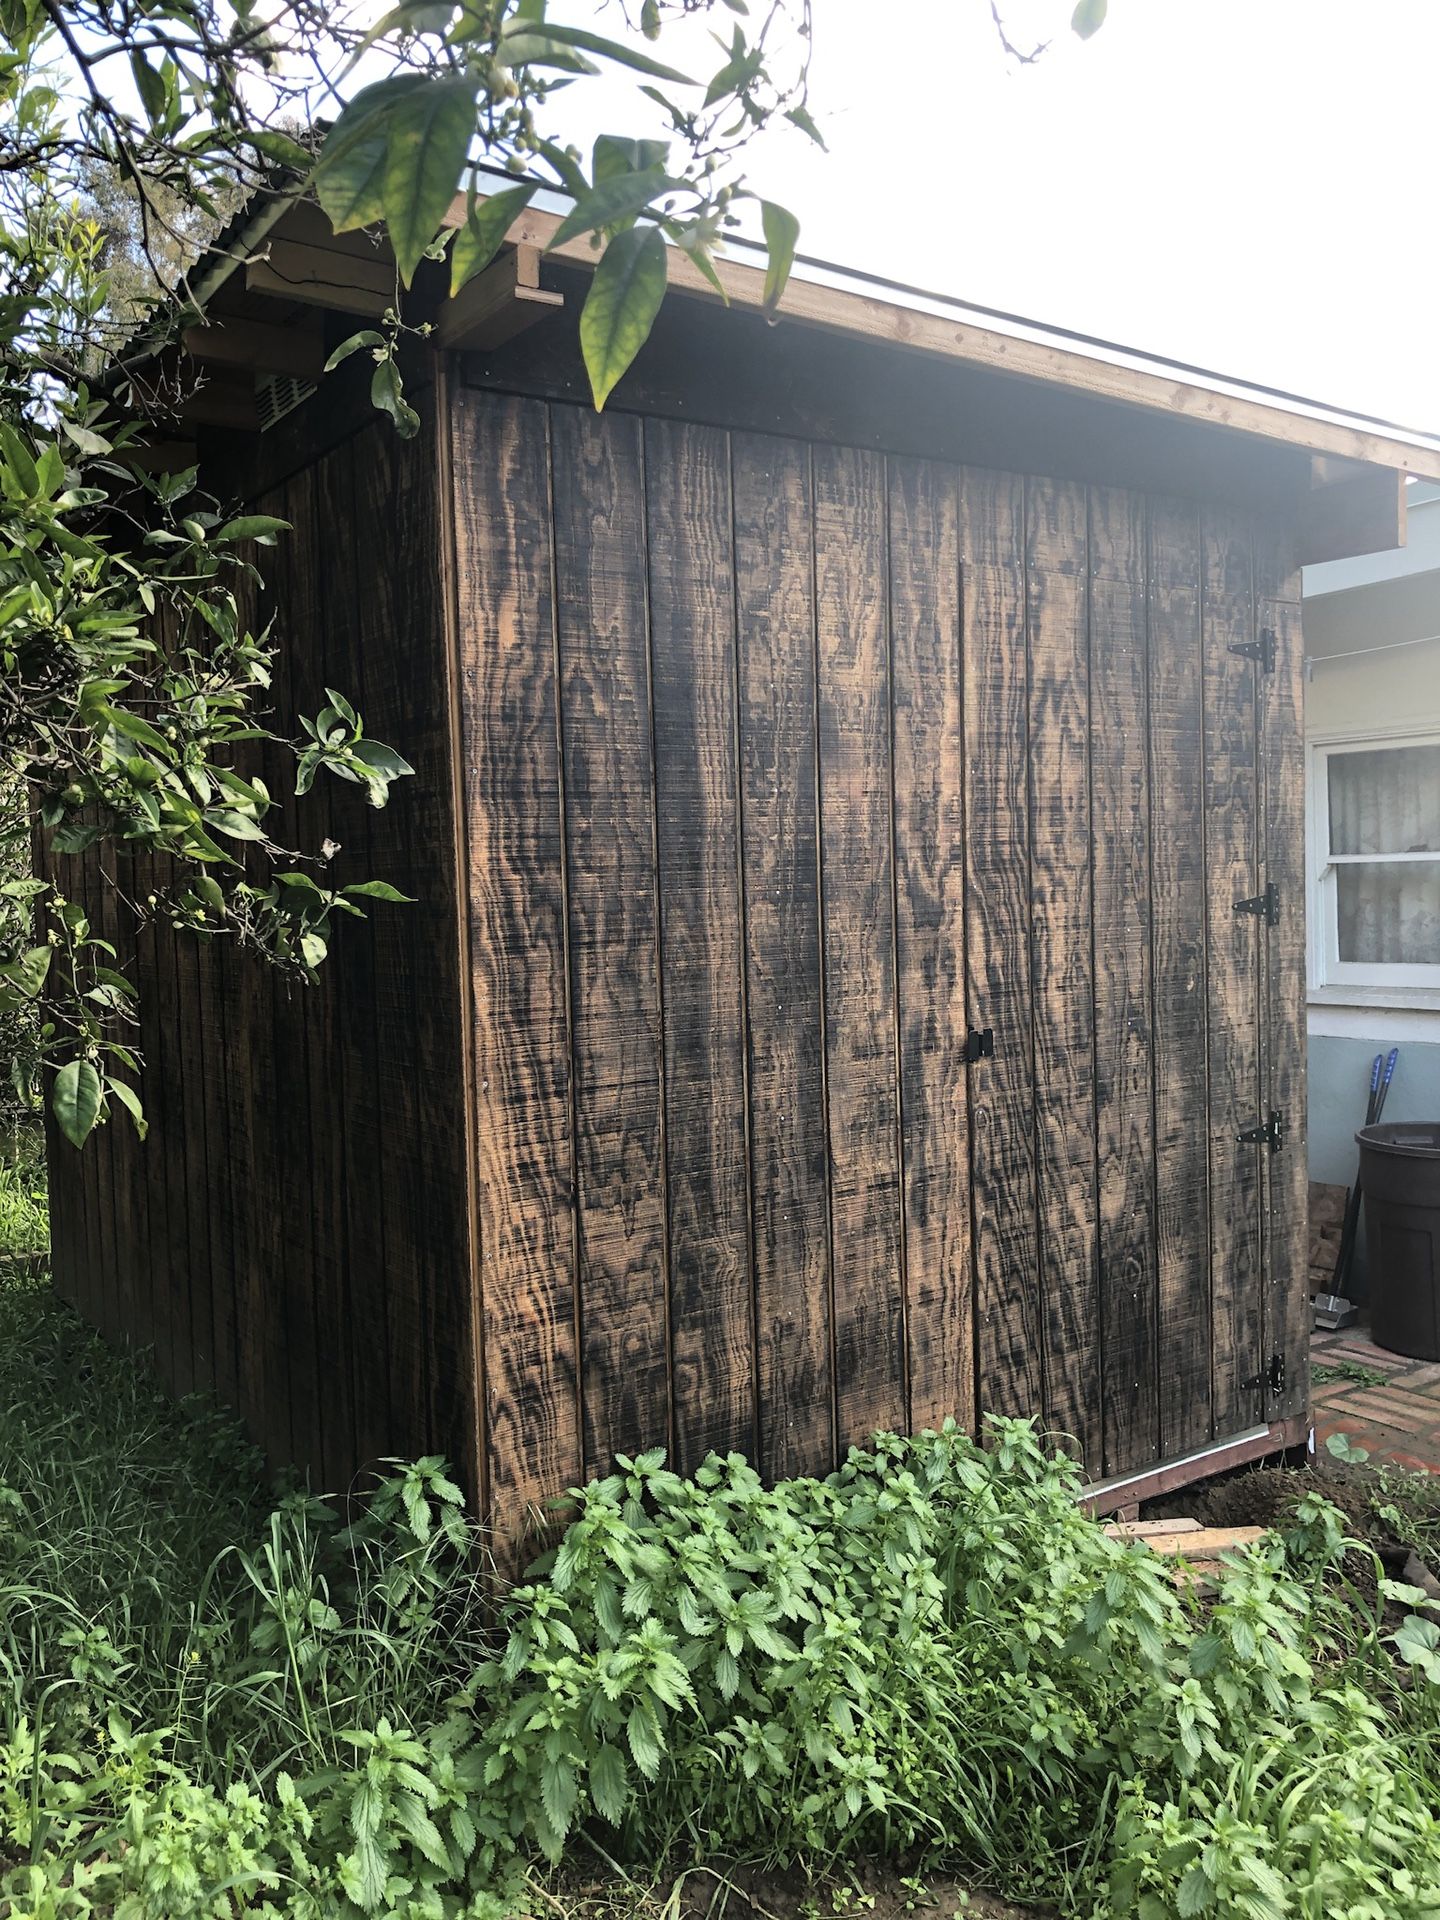 8’x12’ Shed fully built